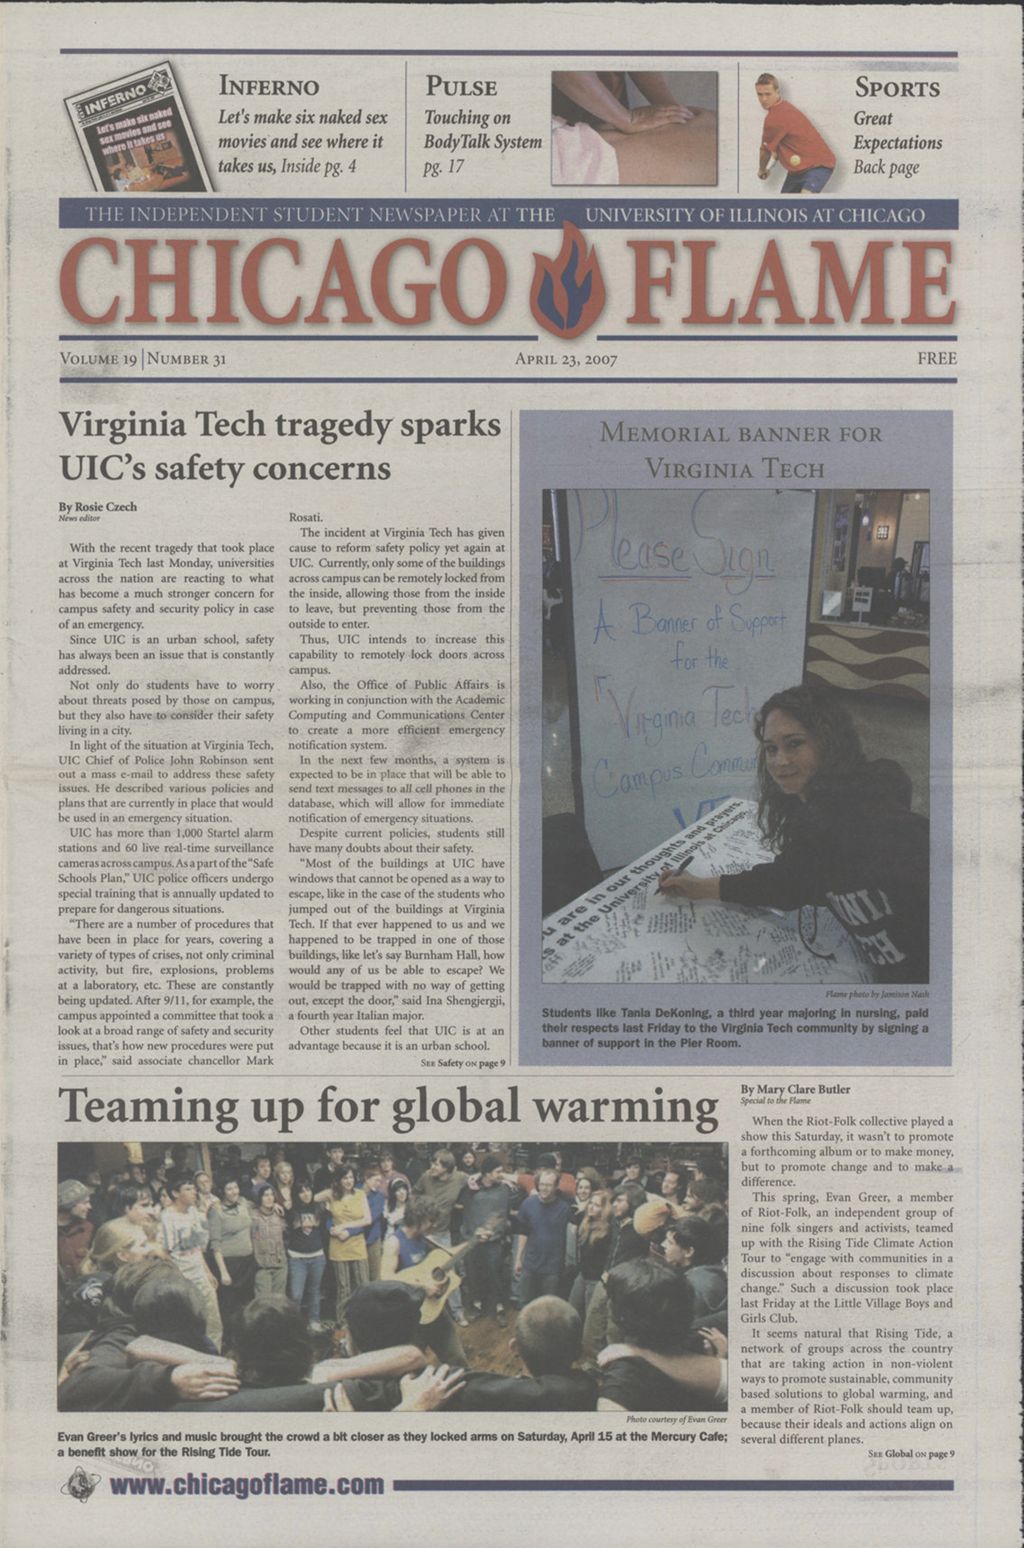 Miniature of Chicago Flame (April 23, 2007)